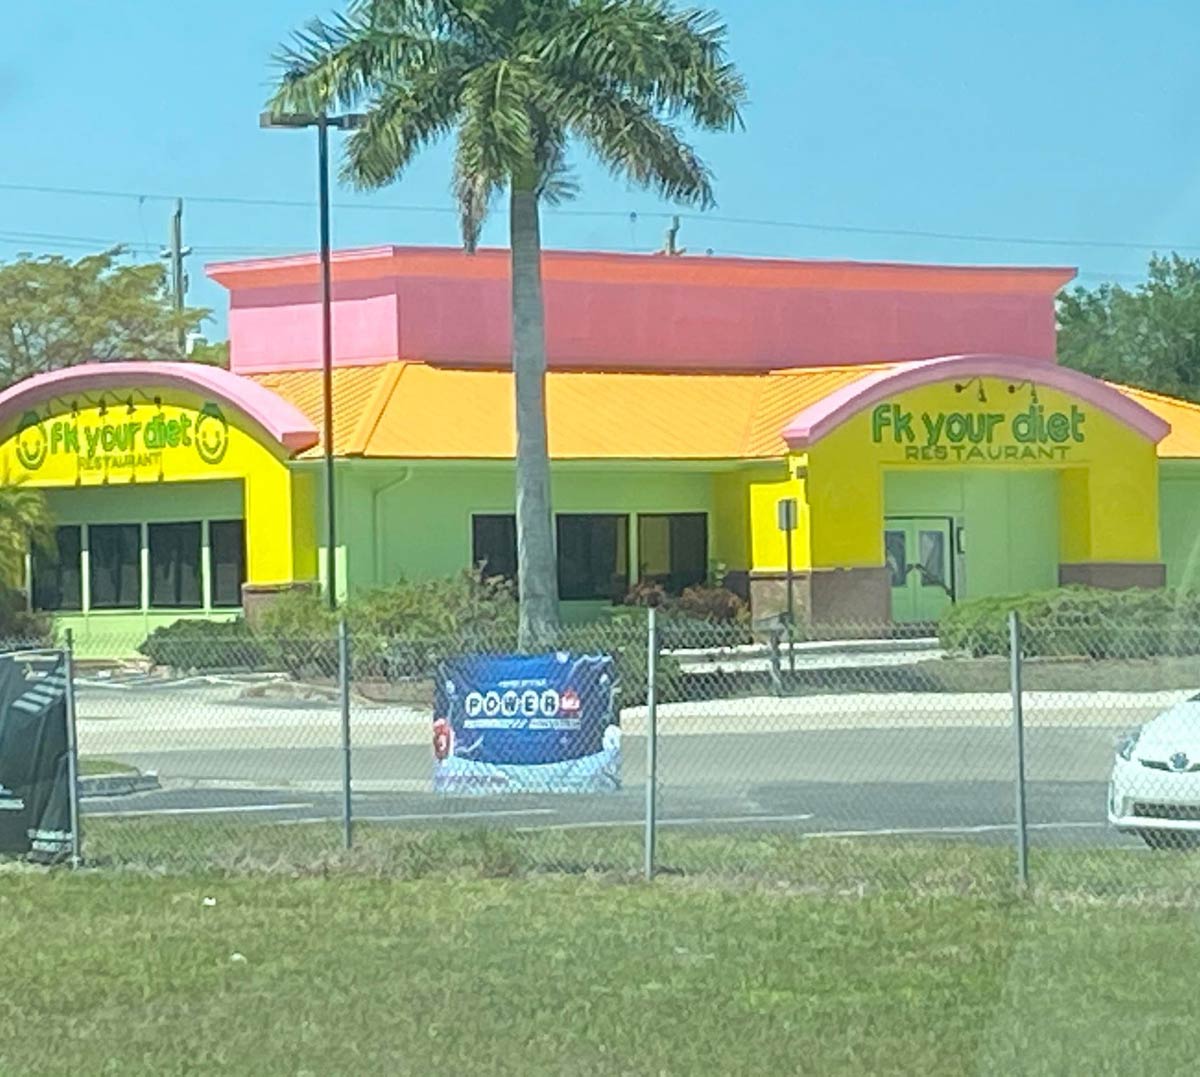 This restaurant I drove by